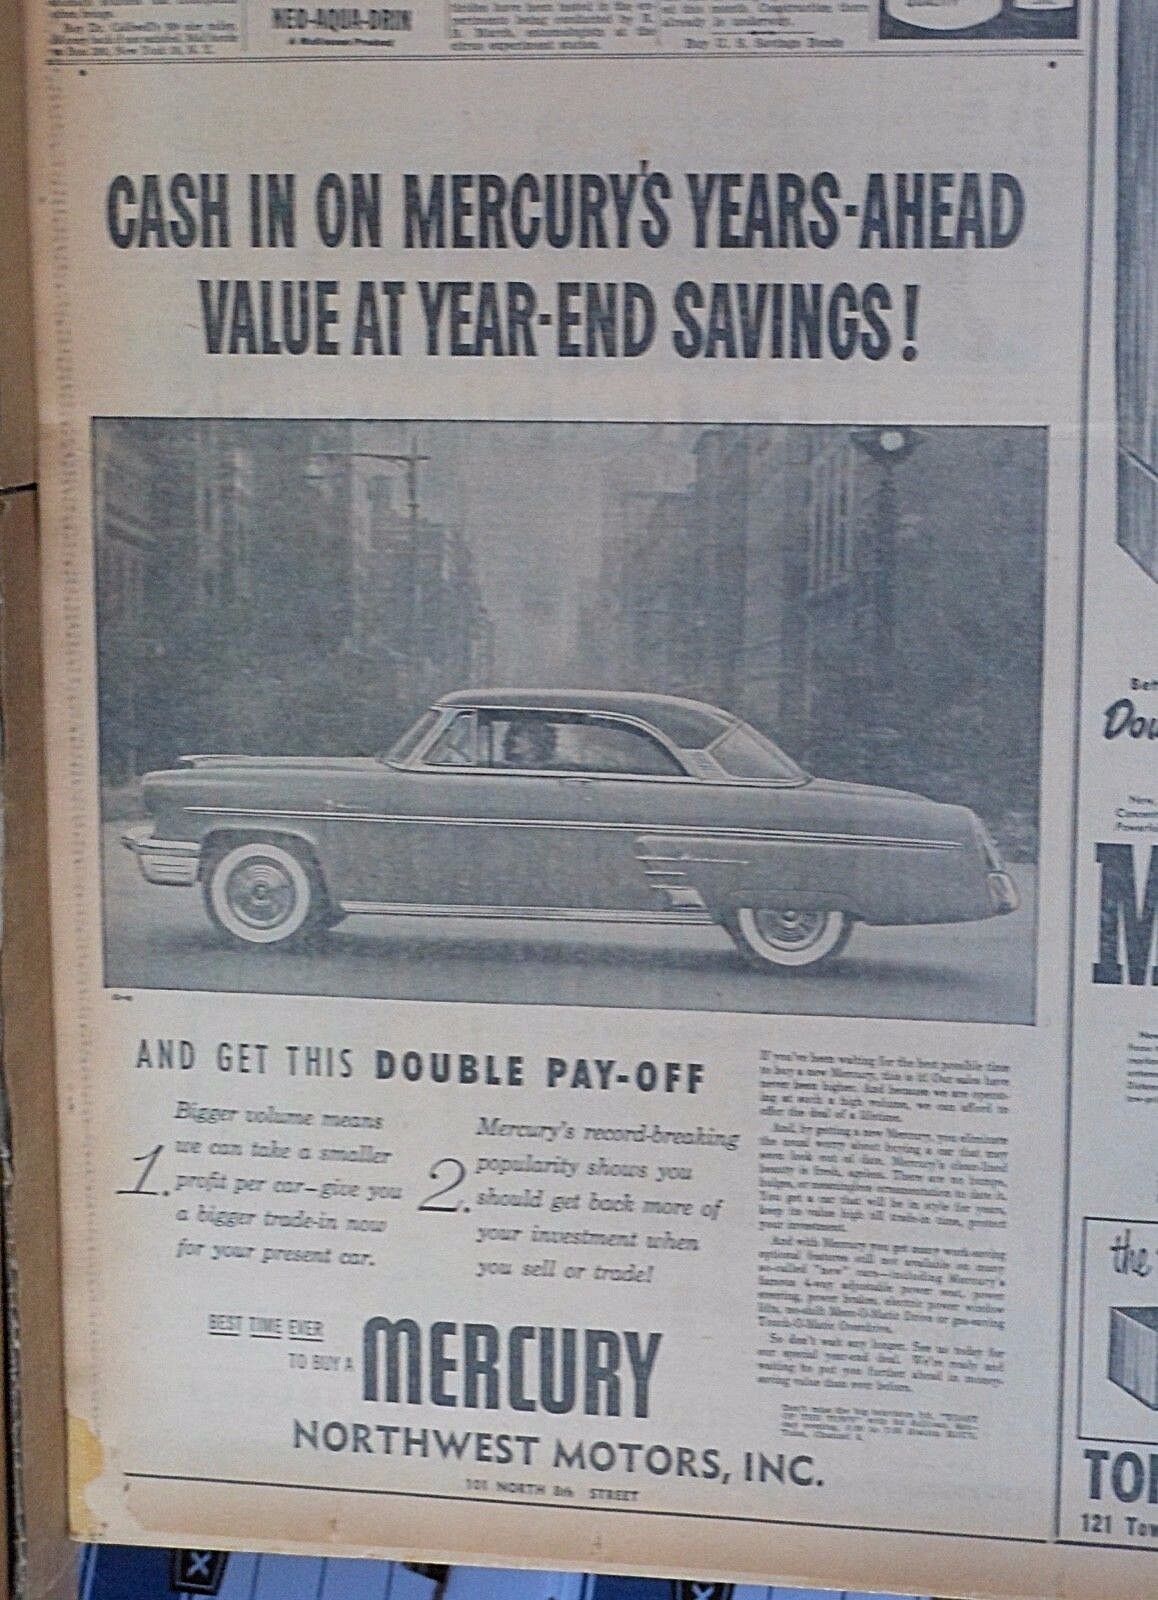 Large 1953 newspaper ad for Mercury - Get double pay-off, Year end savings